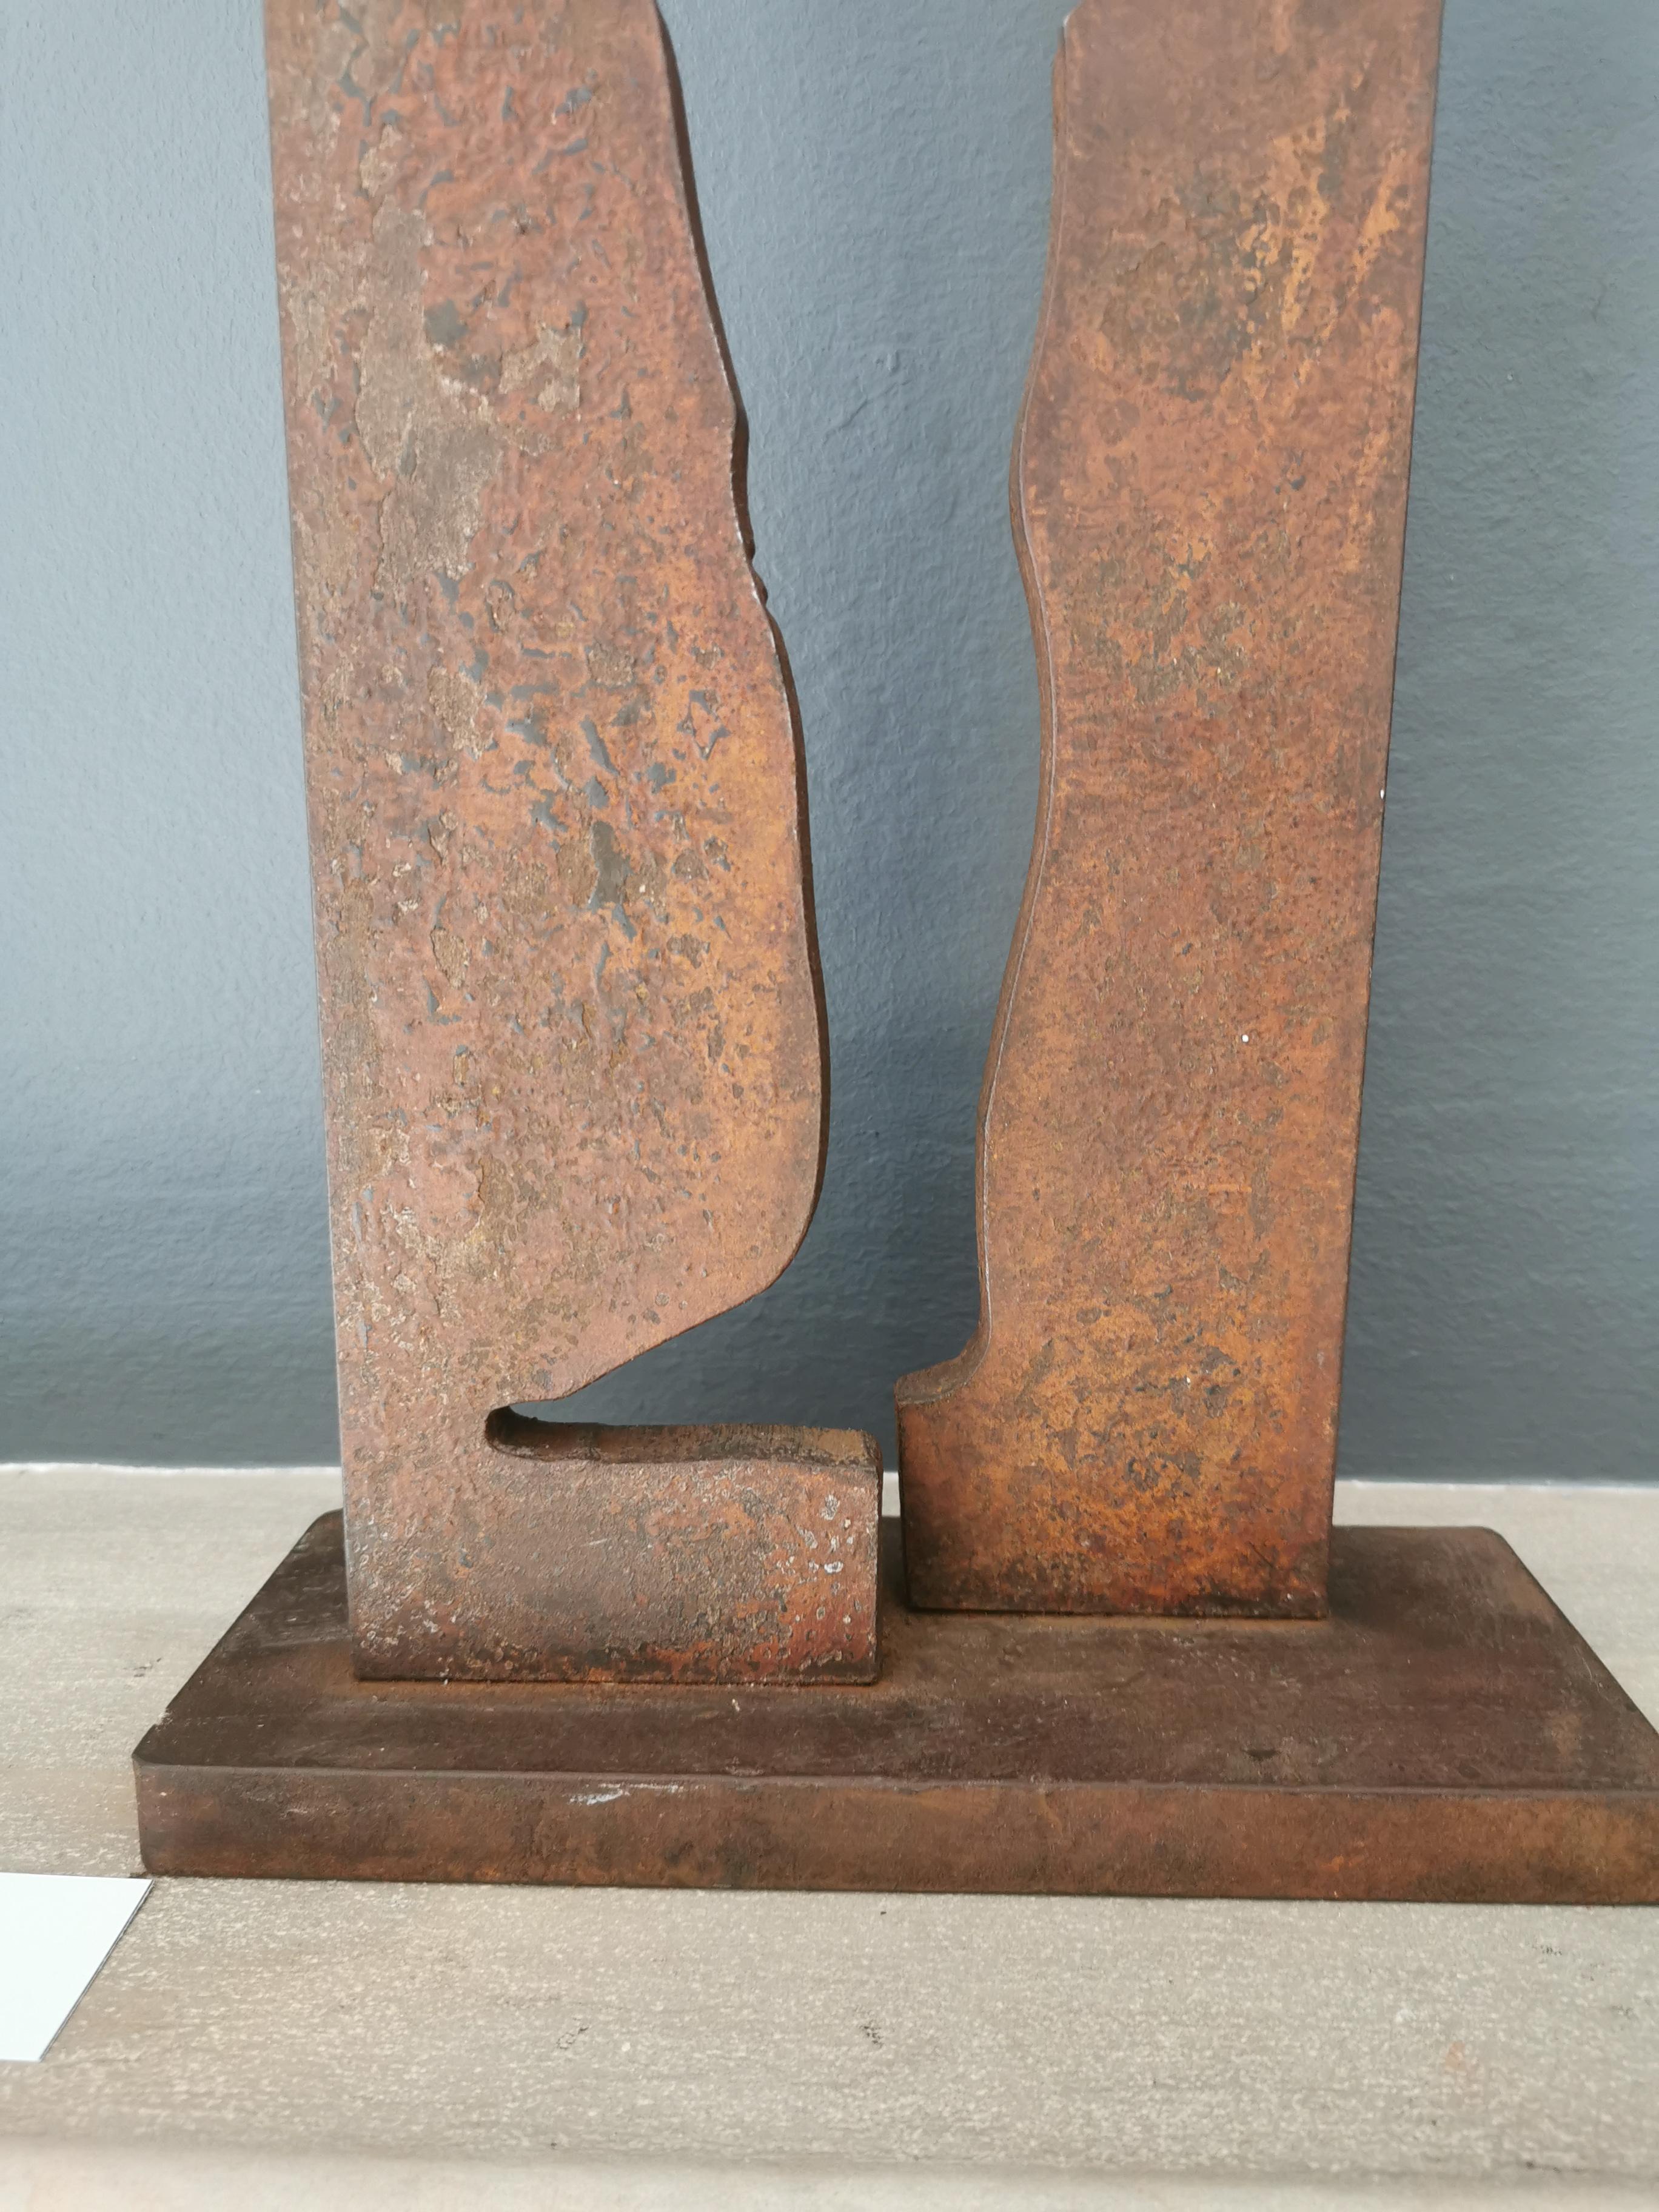 Limited Edition Medium Sized Rusted Steel Sculpture 